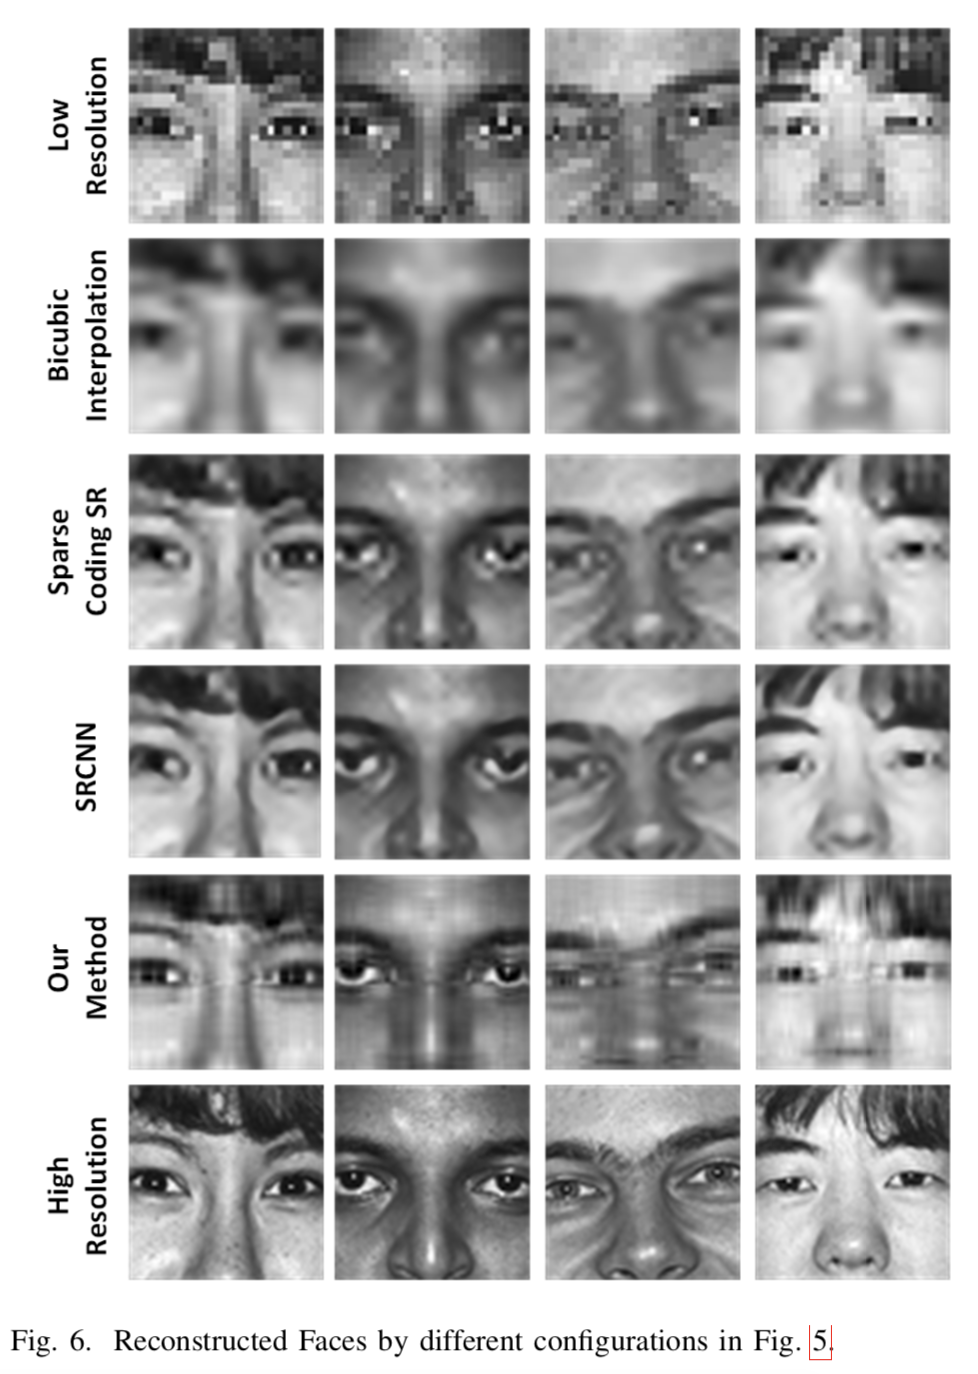 Reconstructed Faces by different configurations